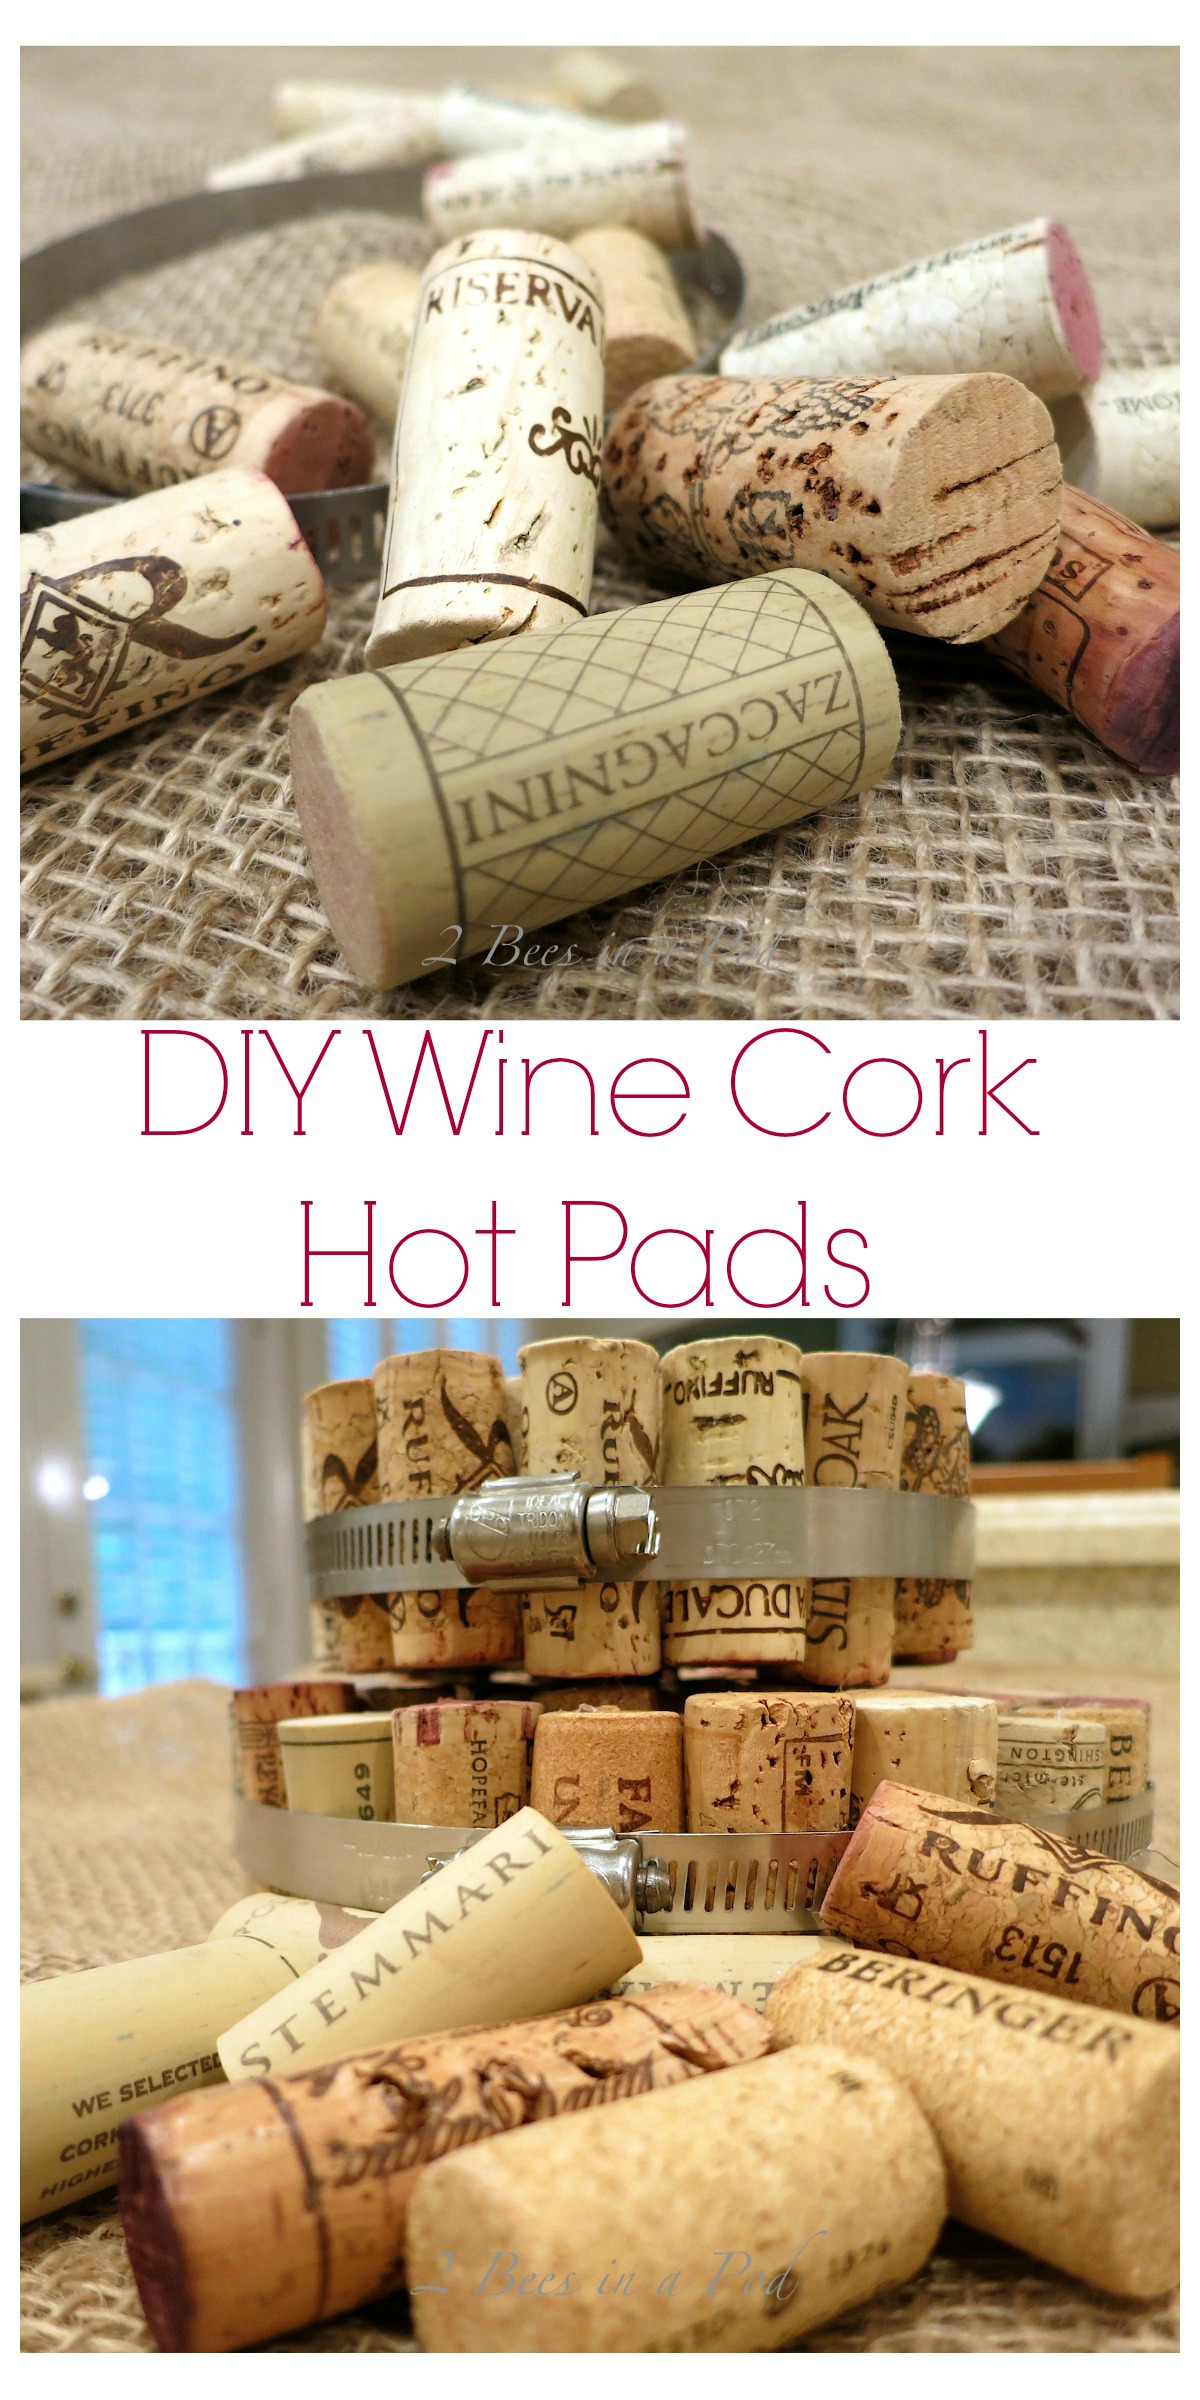 DIY Wine Cork Hot Pads - very easy and inexpensive project. All you need is wine corks and metal hardware clamps and a bit of hot glue.